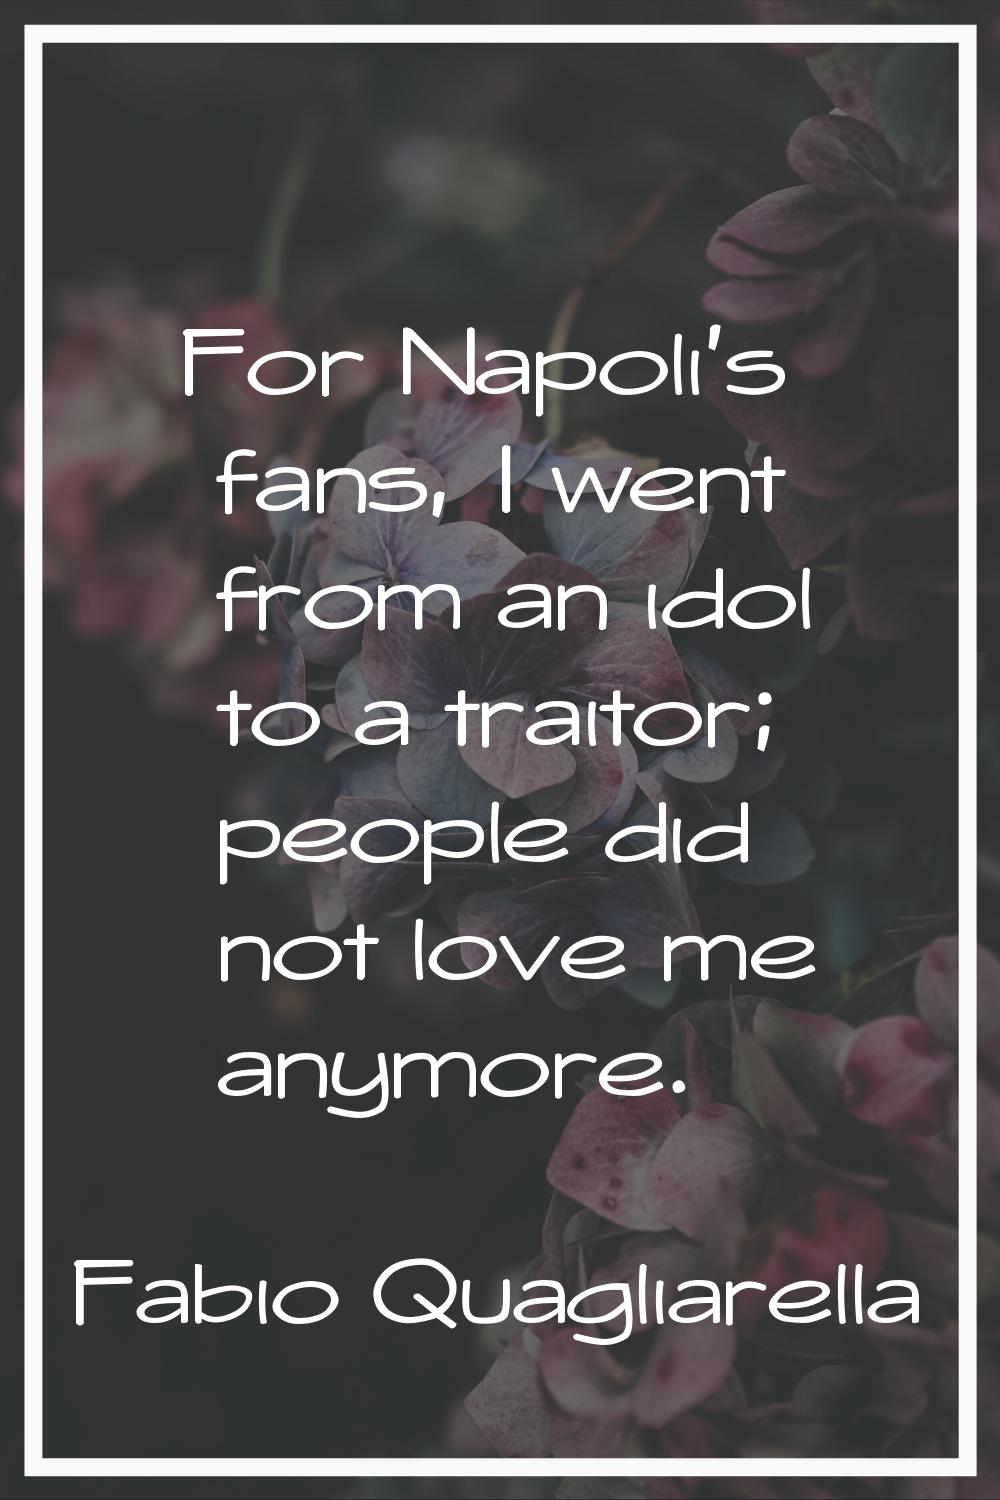 For Napoli's fans, I went from an idol to a traitor; people did not love me anymore.